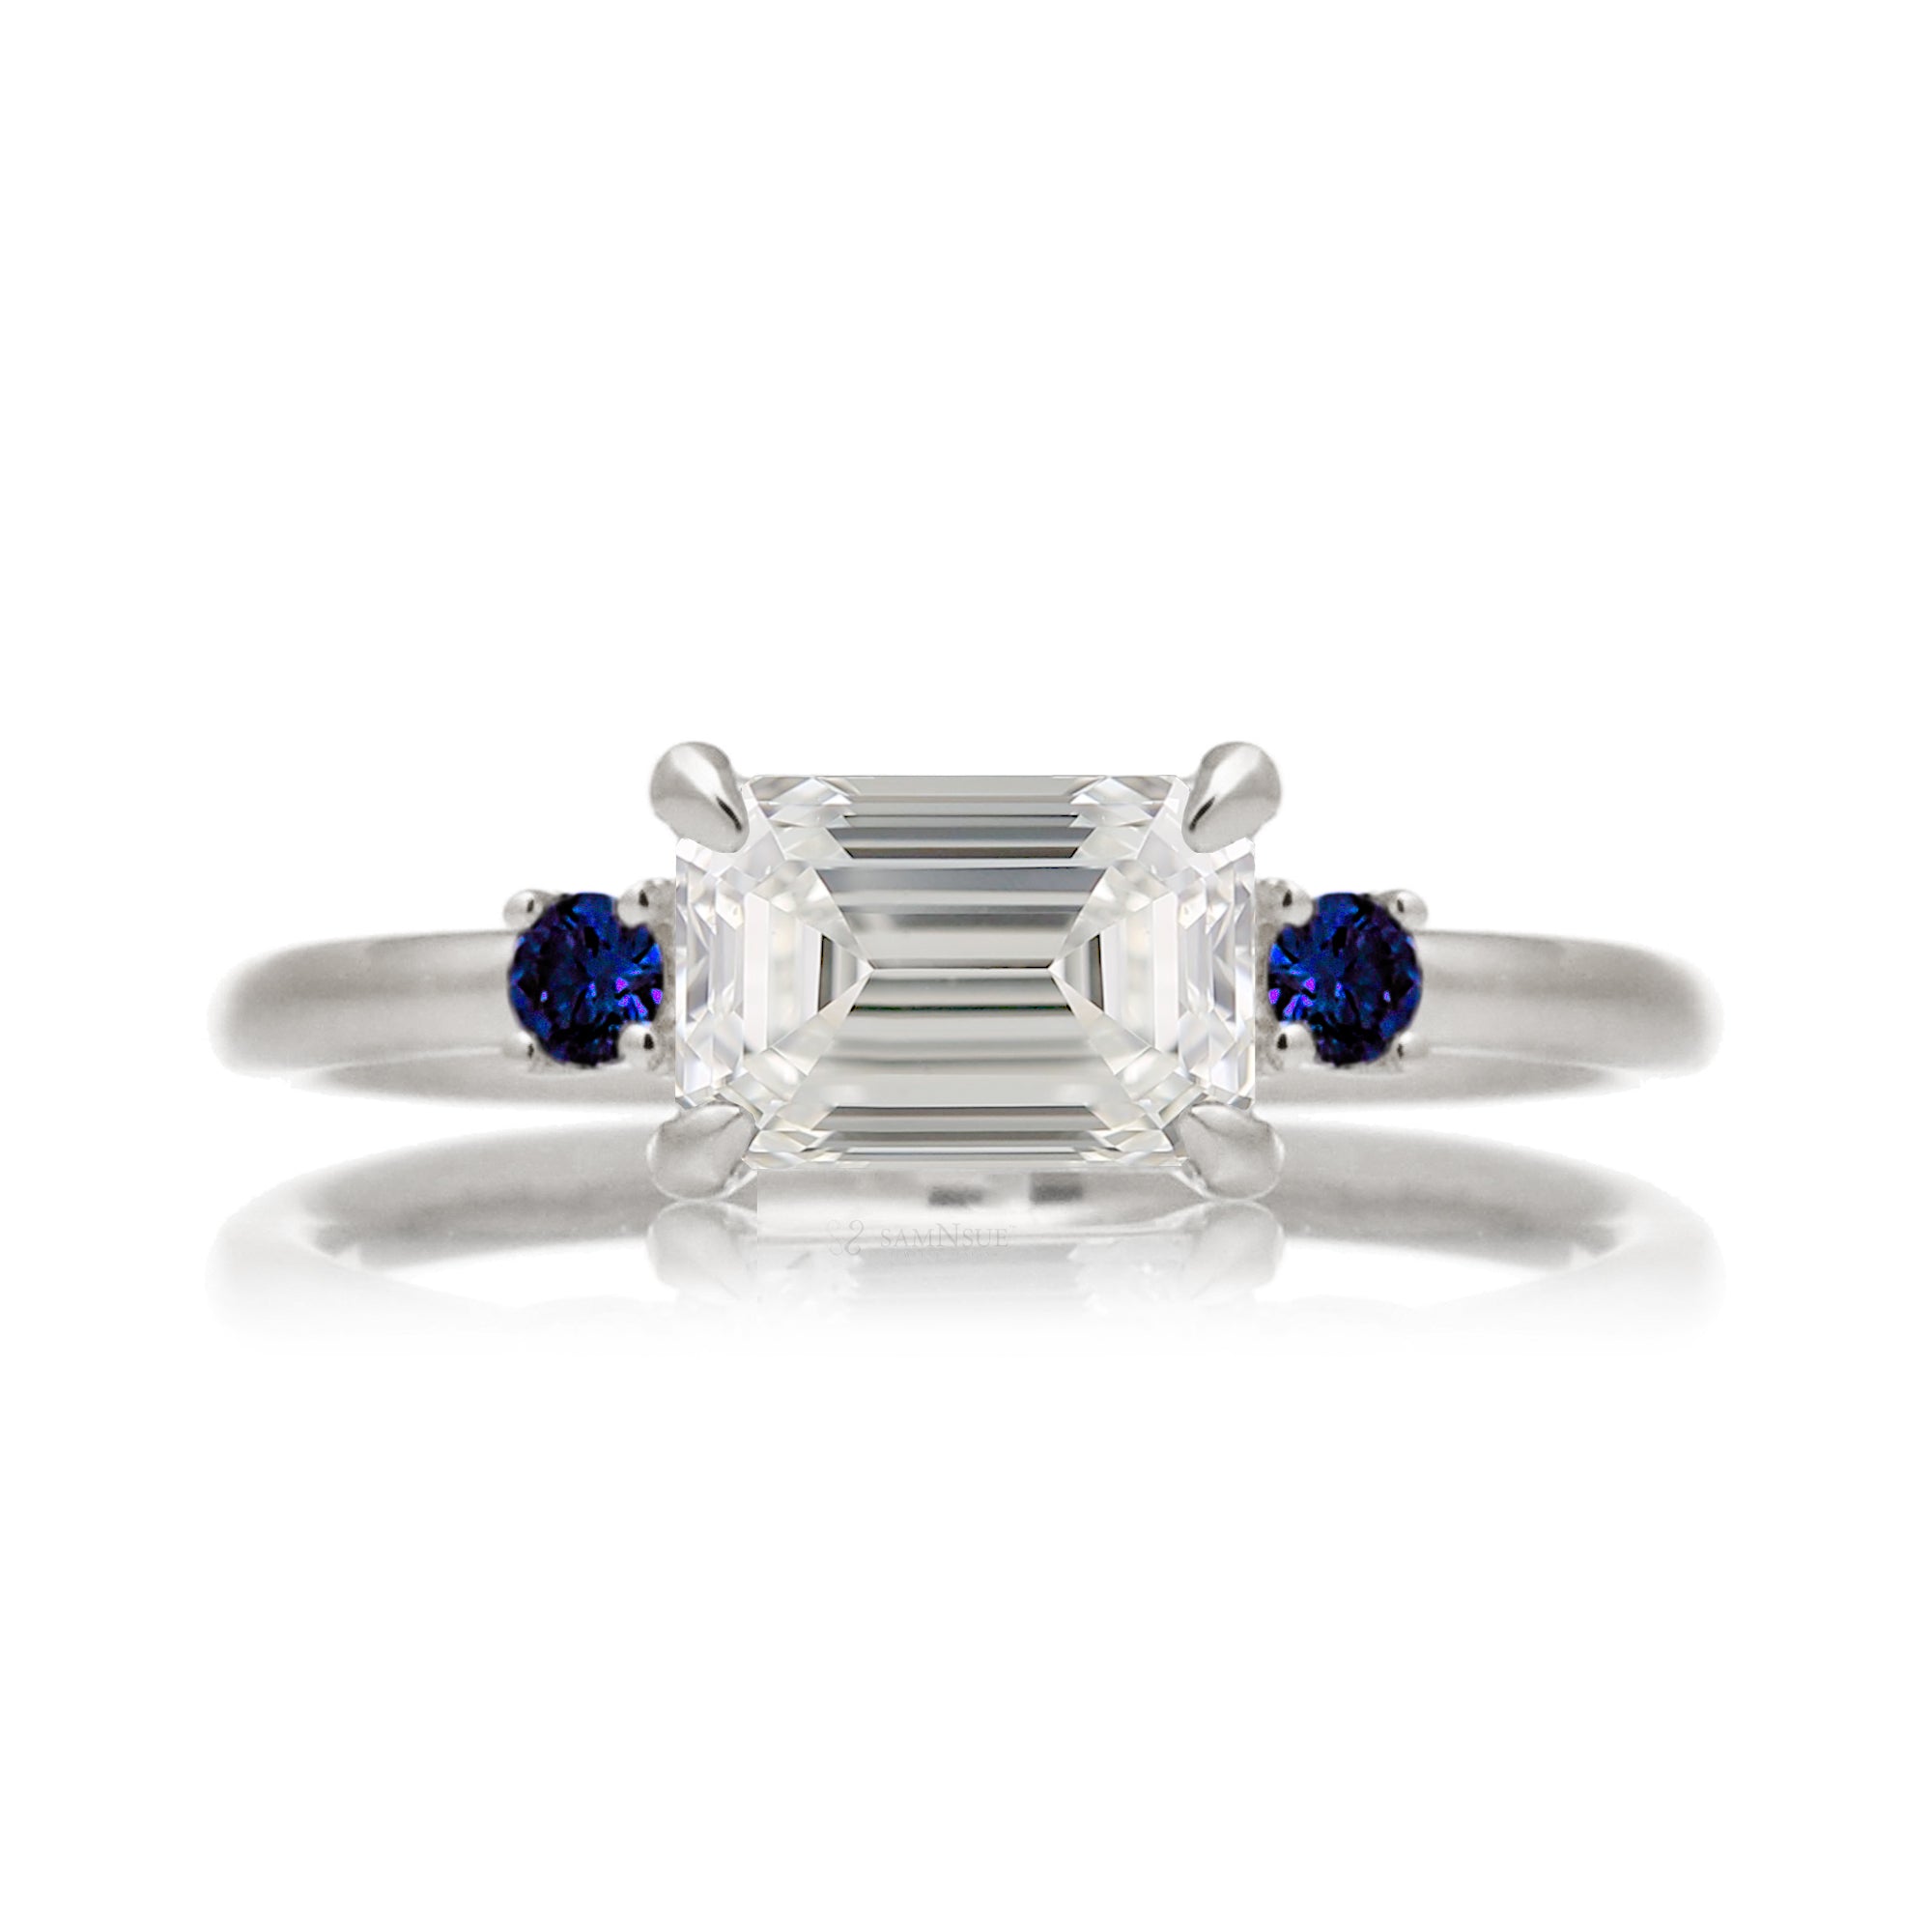 east-west emerald cut diamond three stone ring the Lena with side blue sapphires white gold